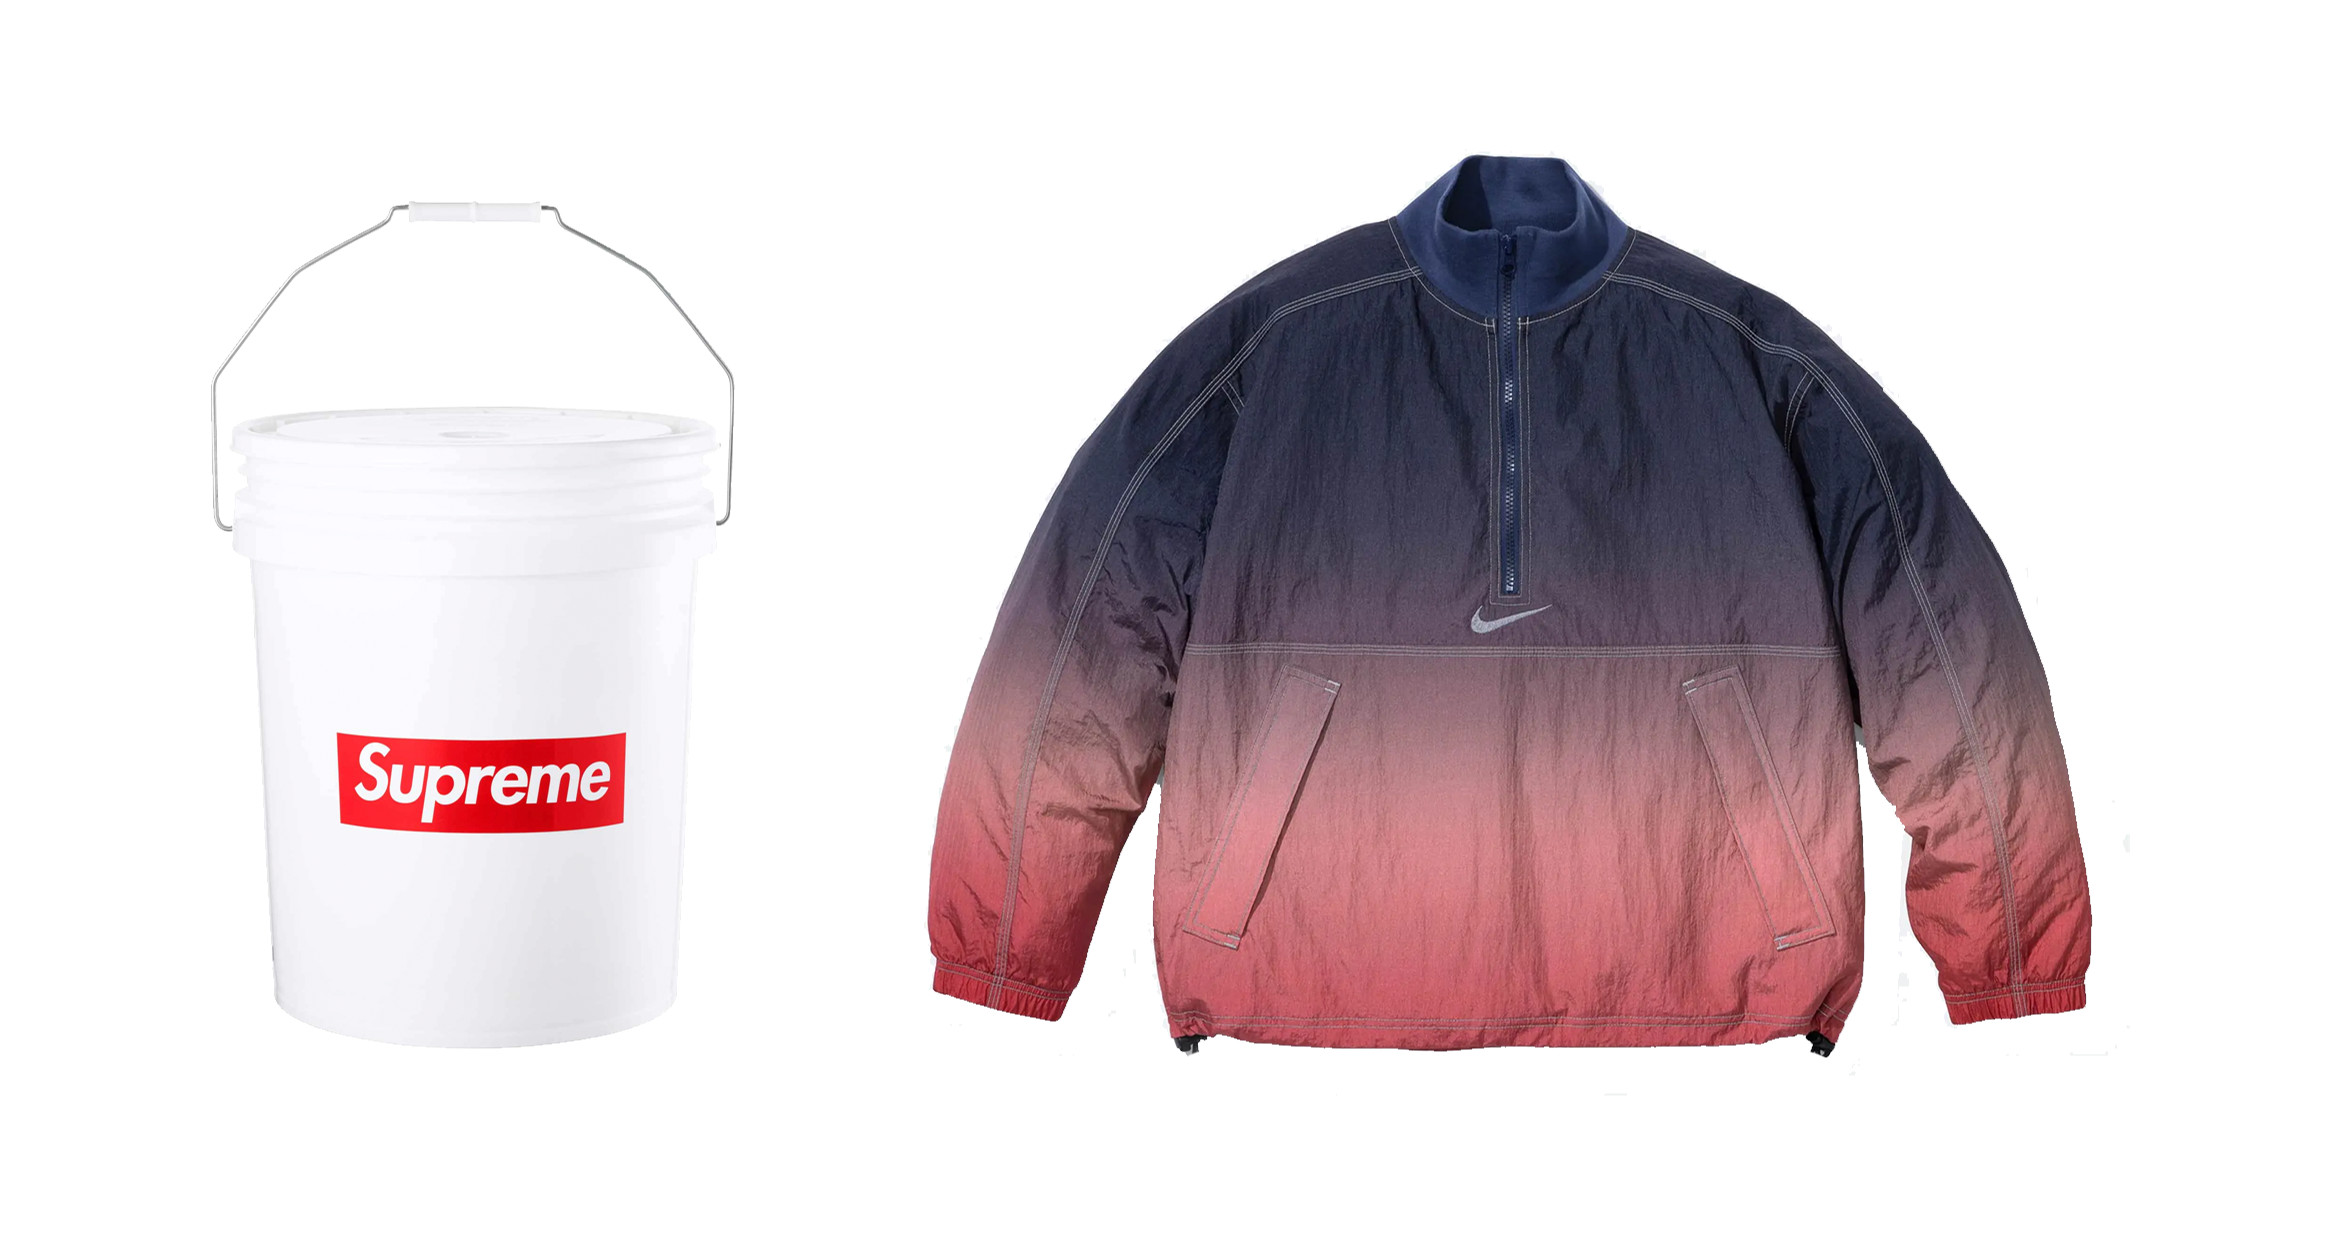 Supreme 5 Gallon Bucket & Gradient Nike Collaboration Dropping This Week